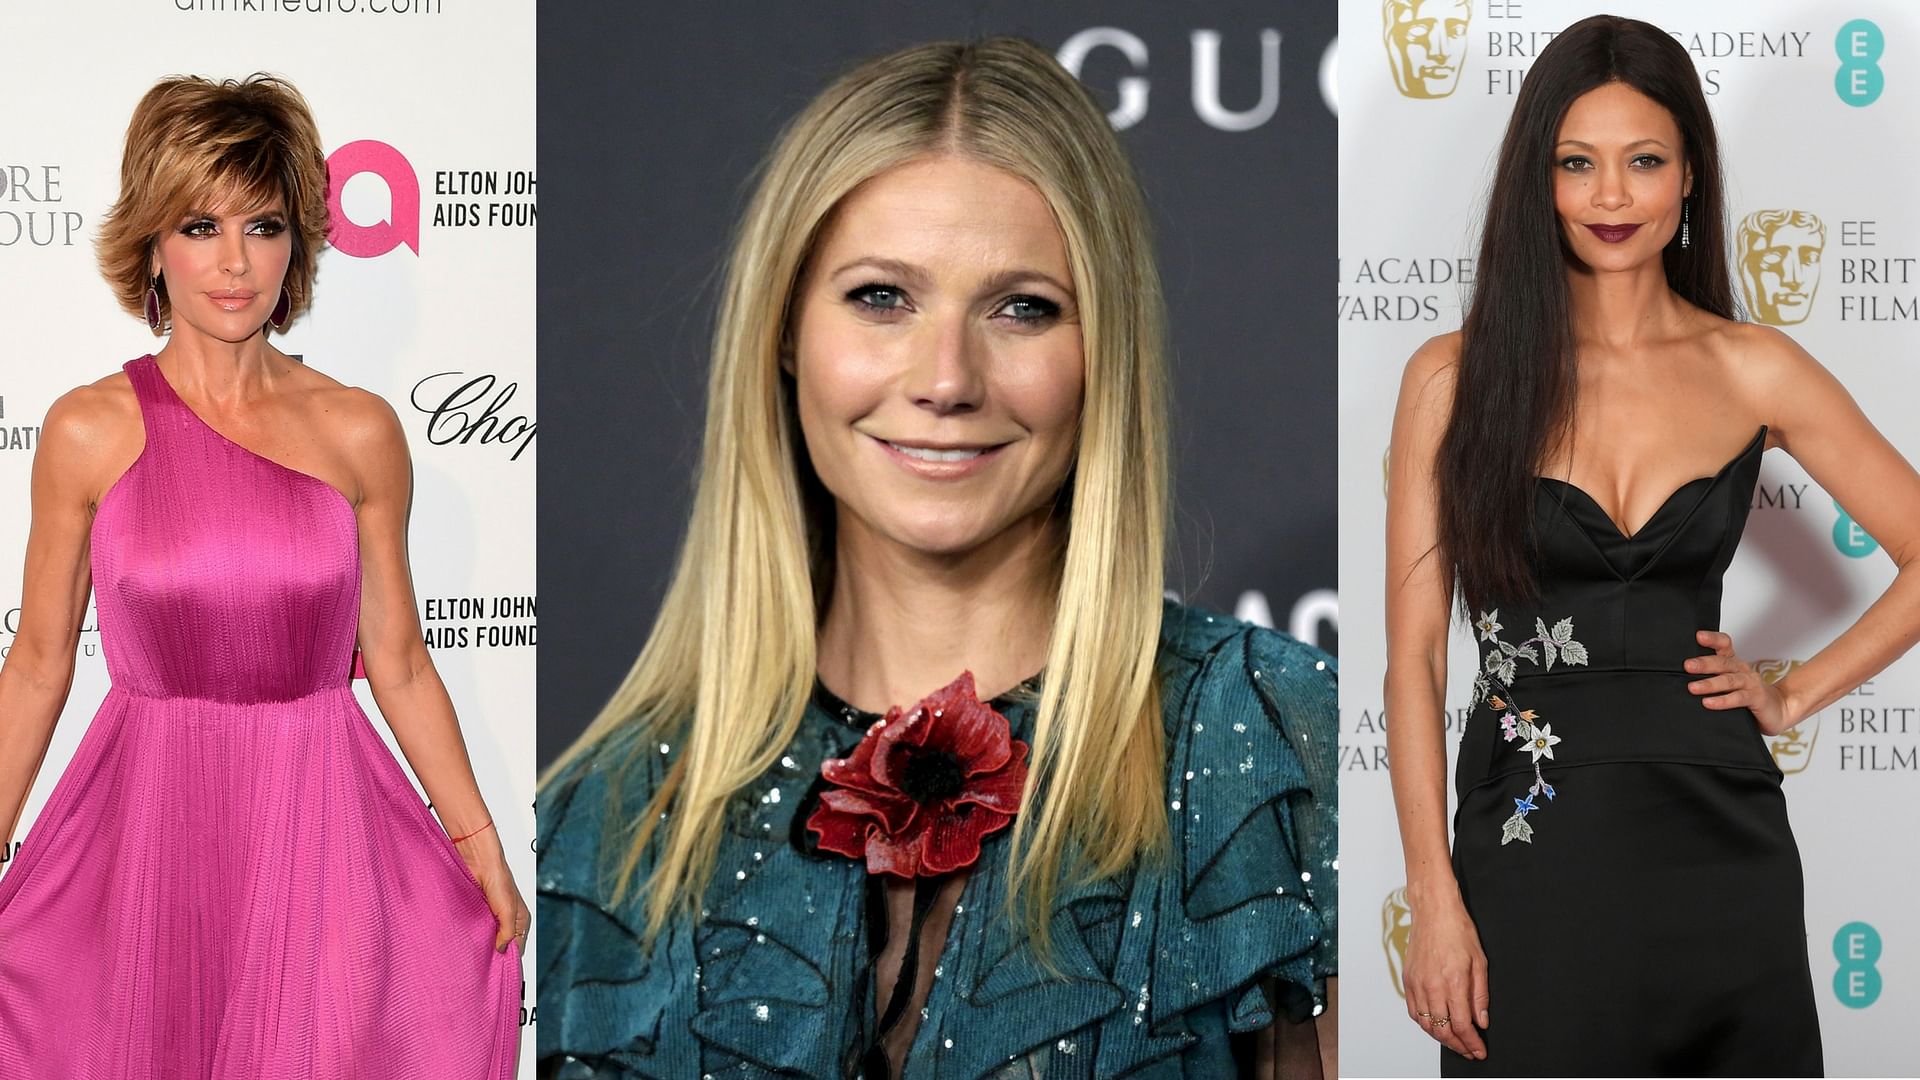 Lisa Rinna, Gwyneth Paltrow, and Thandie Newton have all spoken about sexual harassment.&nbsp;